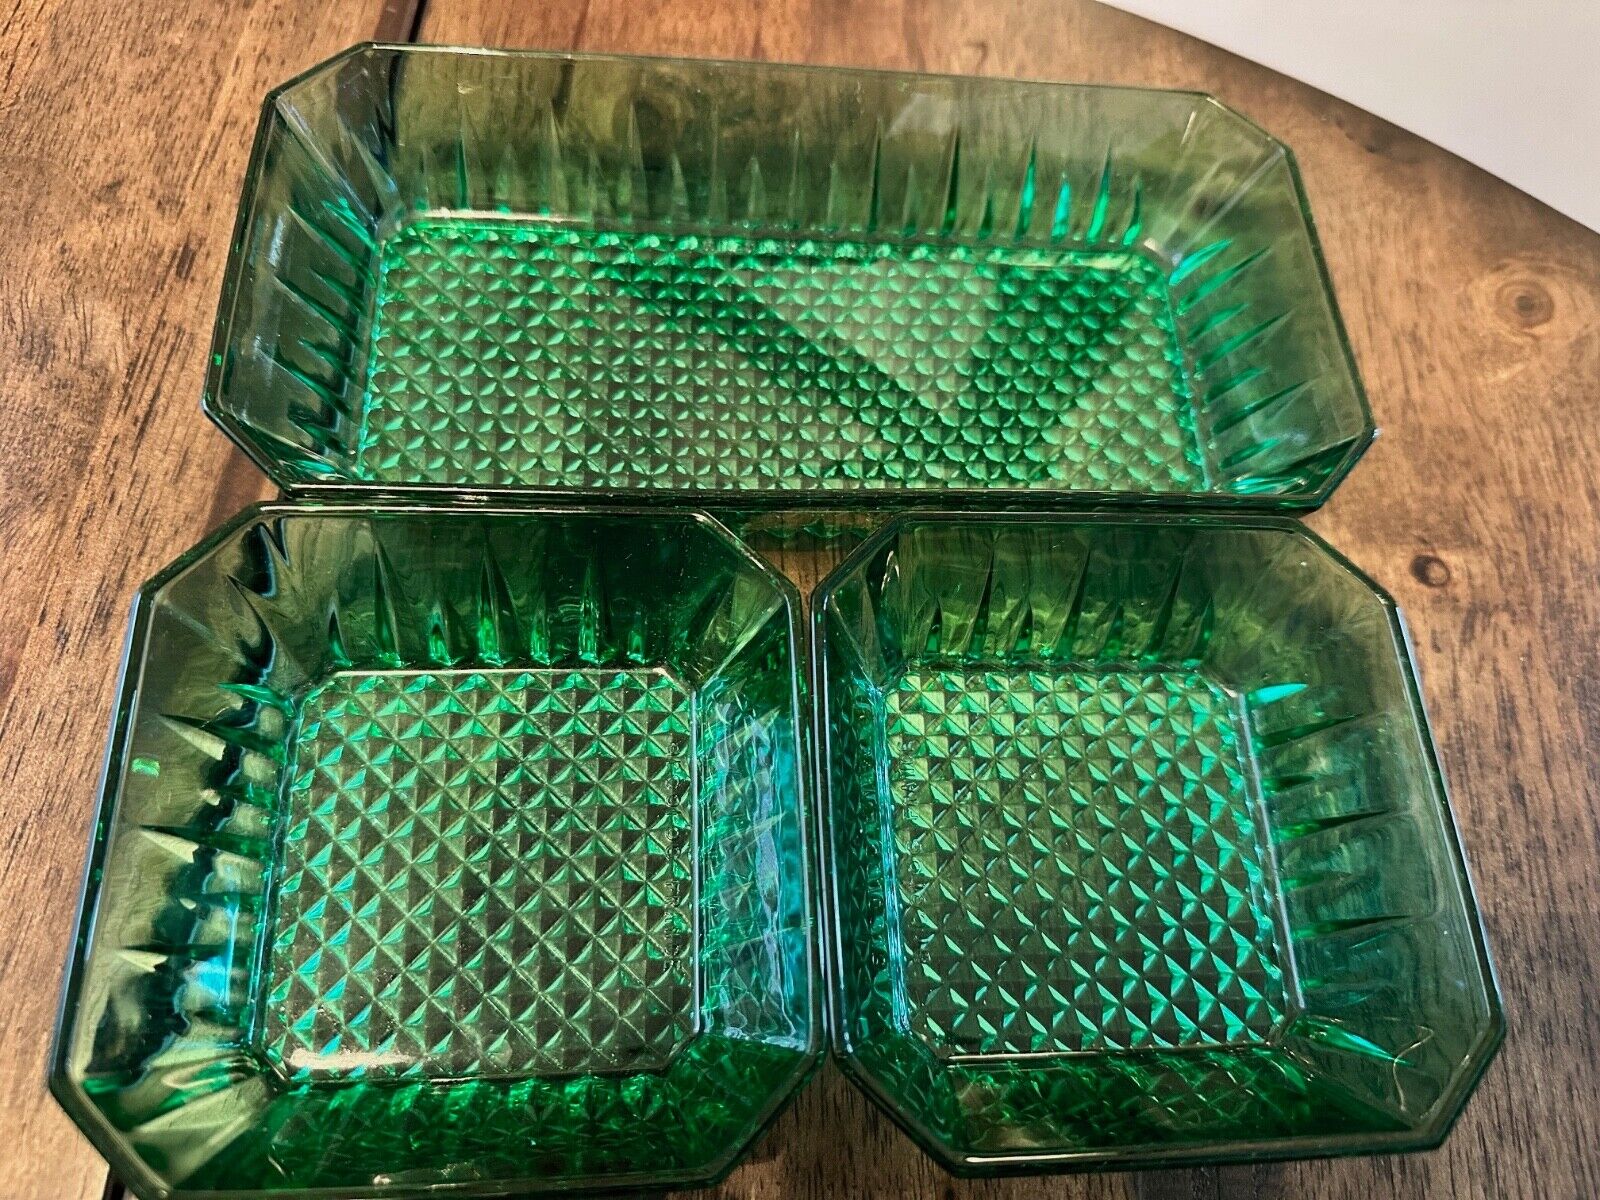 Set of 3 Vintage Emerald Green Arcoroc French Serving Dishes Trays MCM, Rare